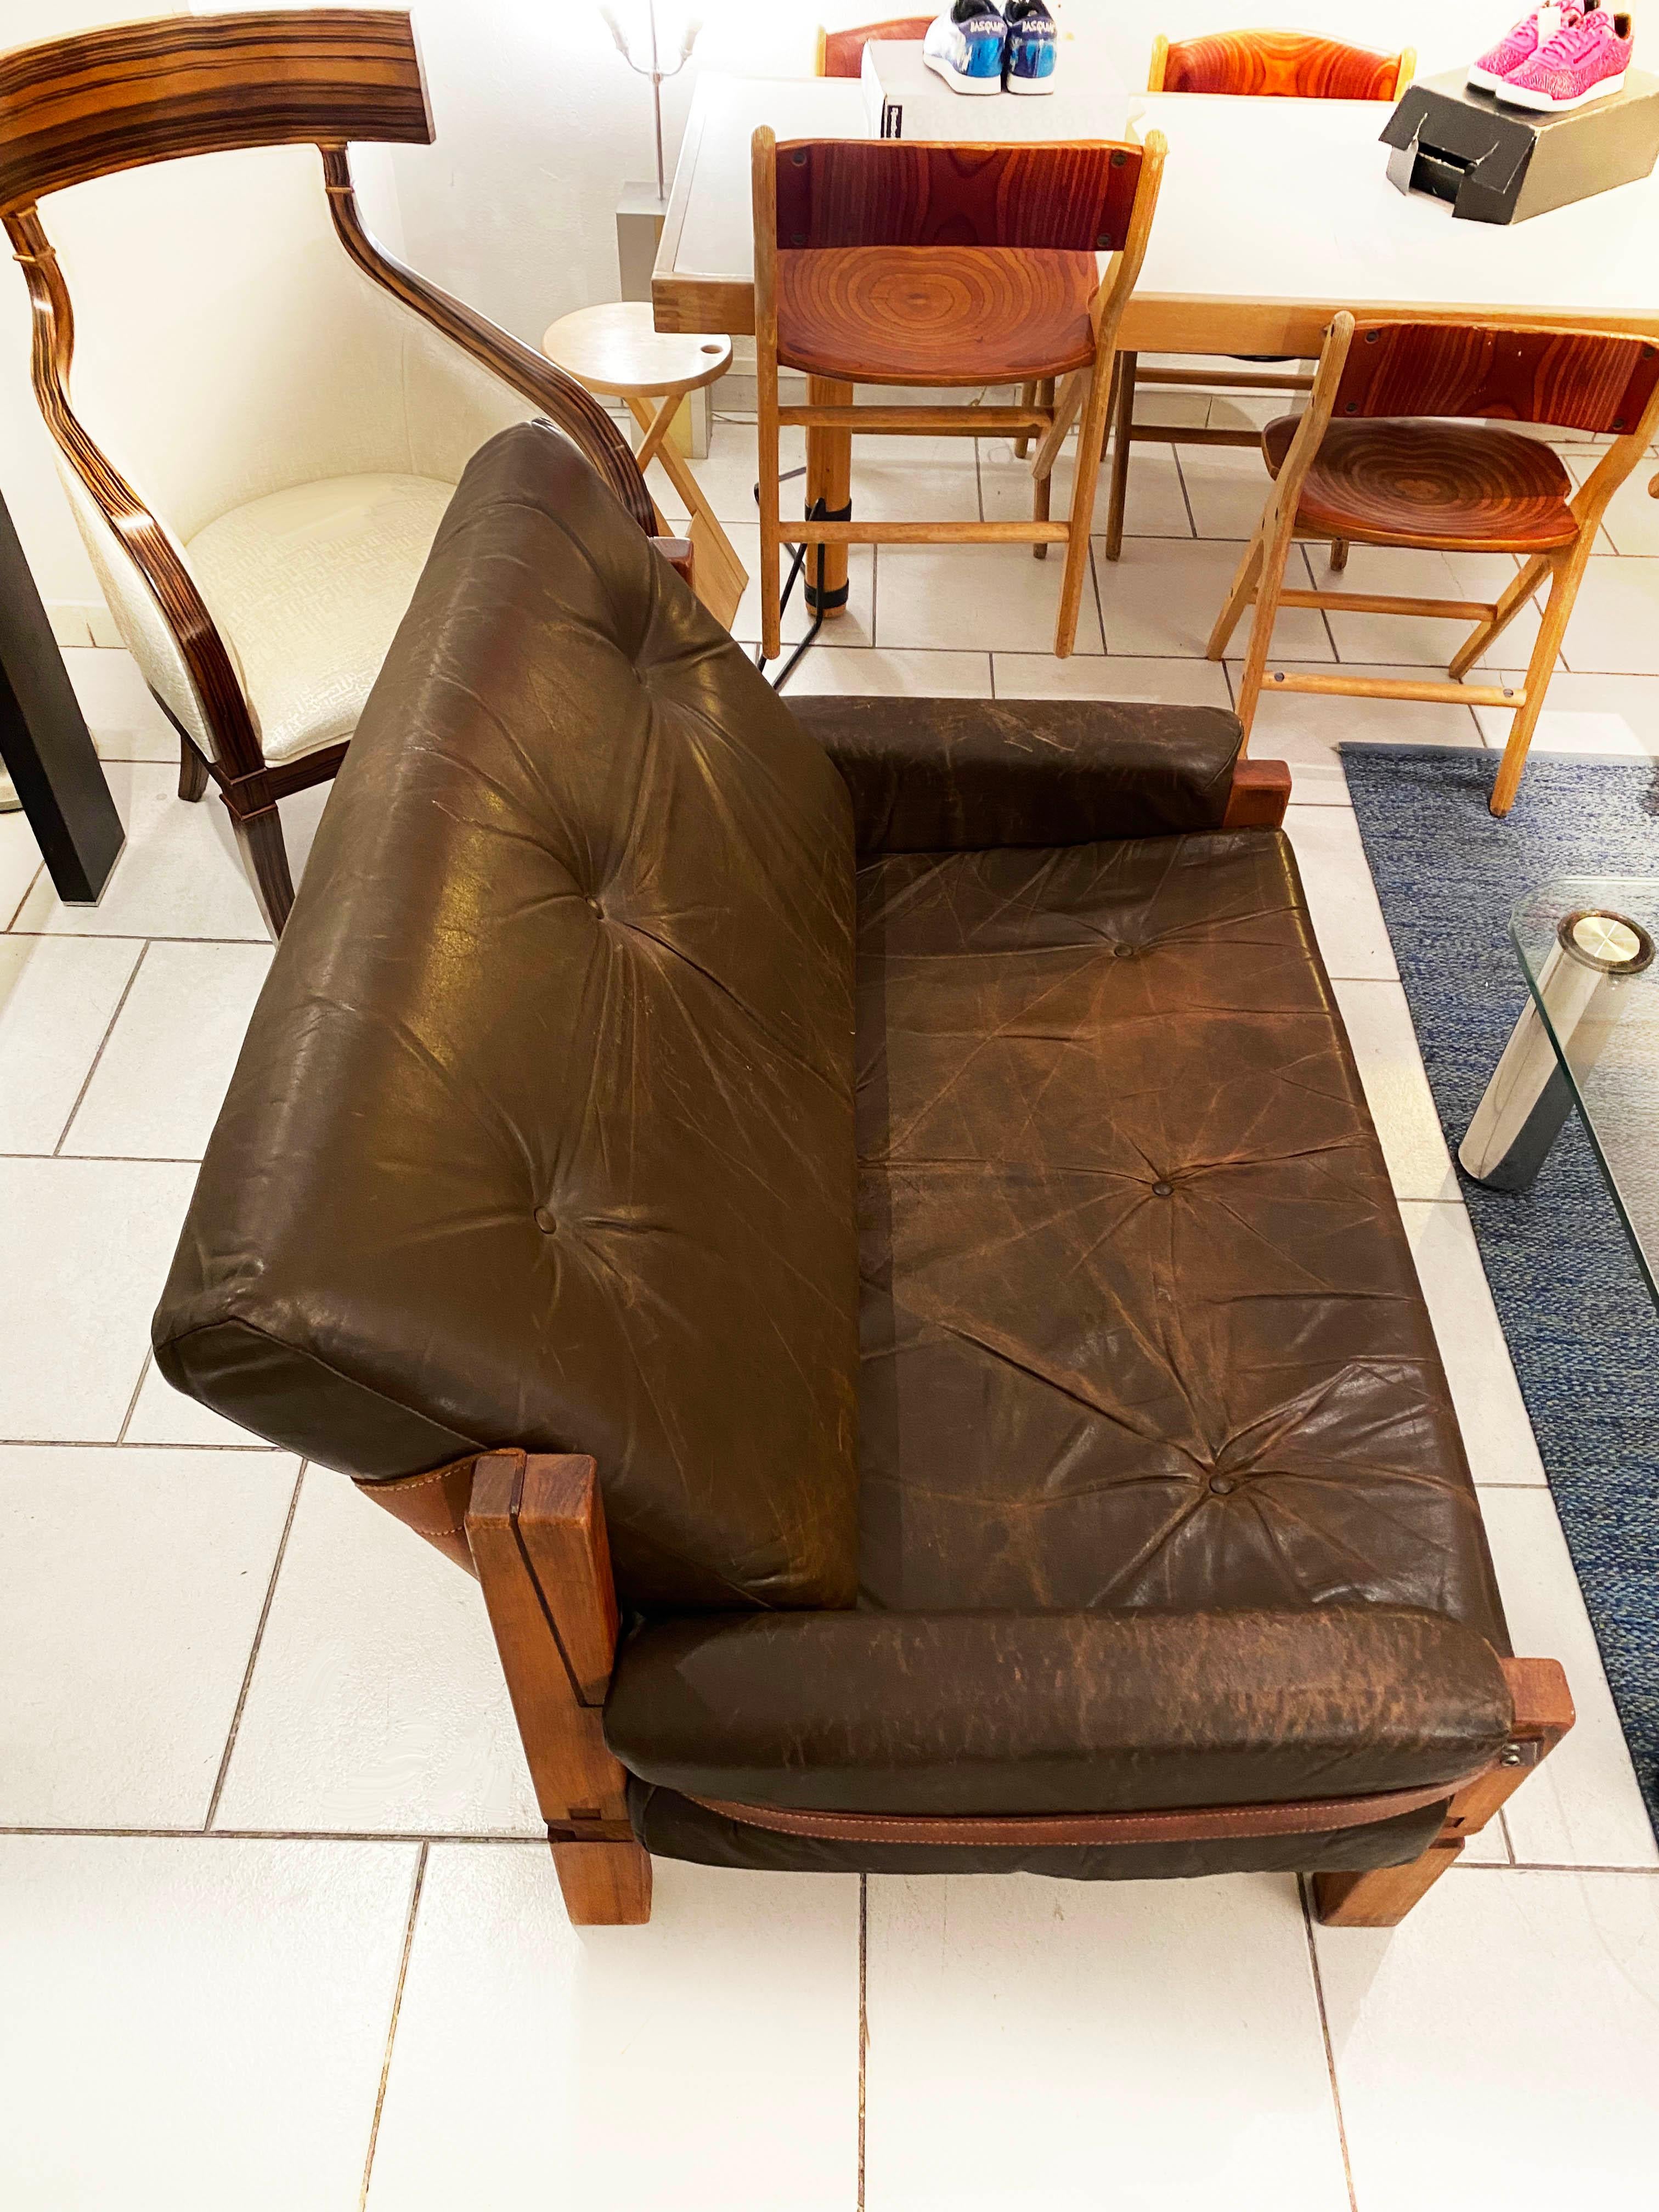 Sofa S18 y
Circa 1972
Leather/shape/massive
2 seats
137x75px72h
Price : 2900 € for the sofa.